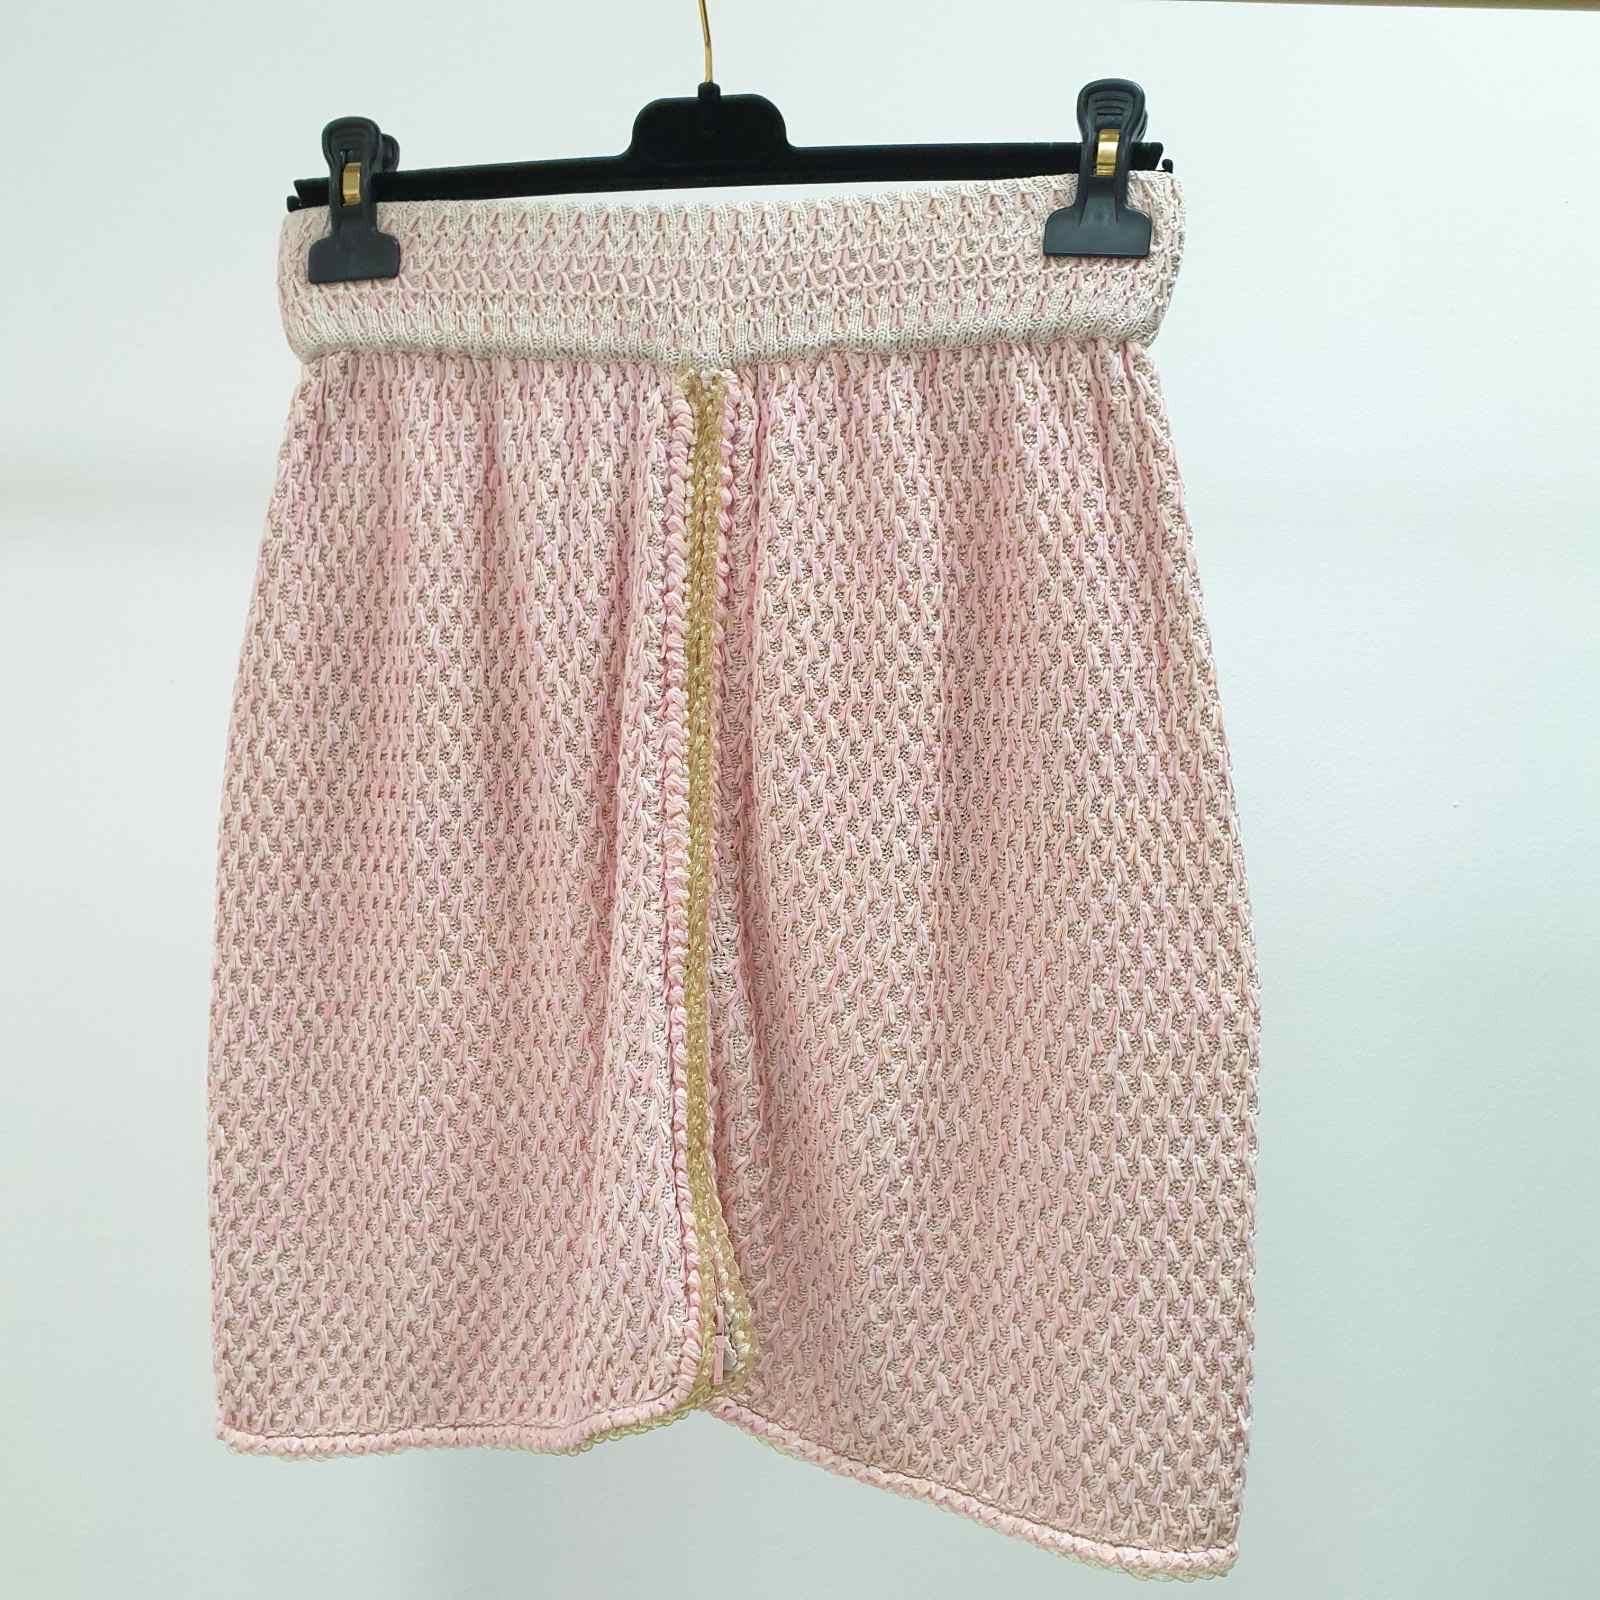 Chanel Pink Knitted Flare Mini Skirt.

Size 38

Very good condition